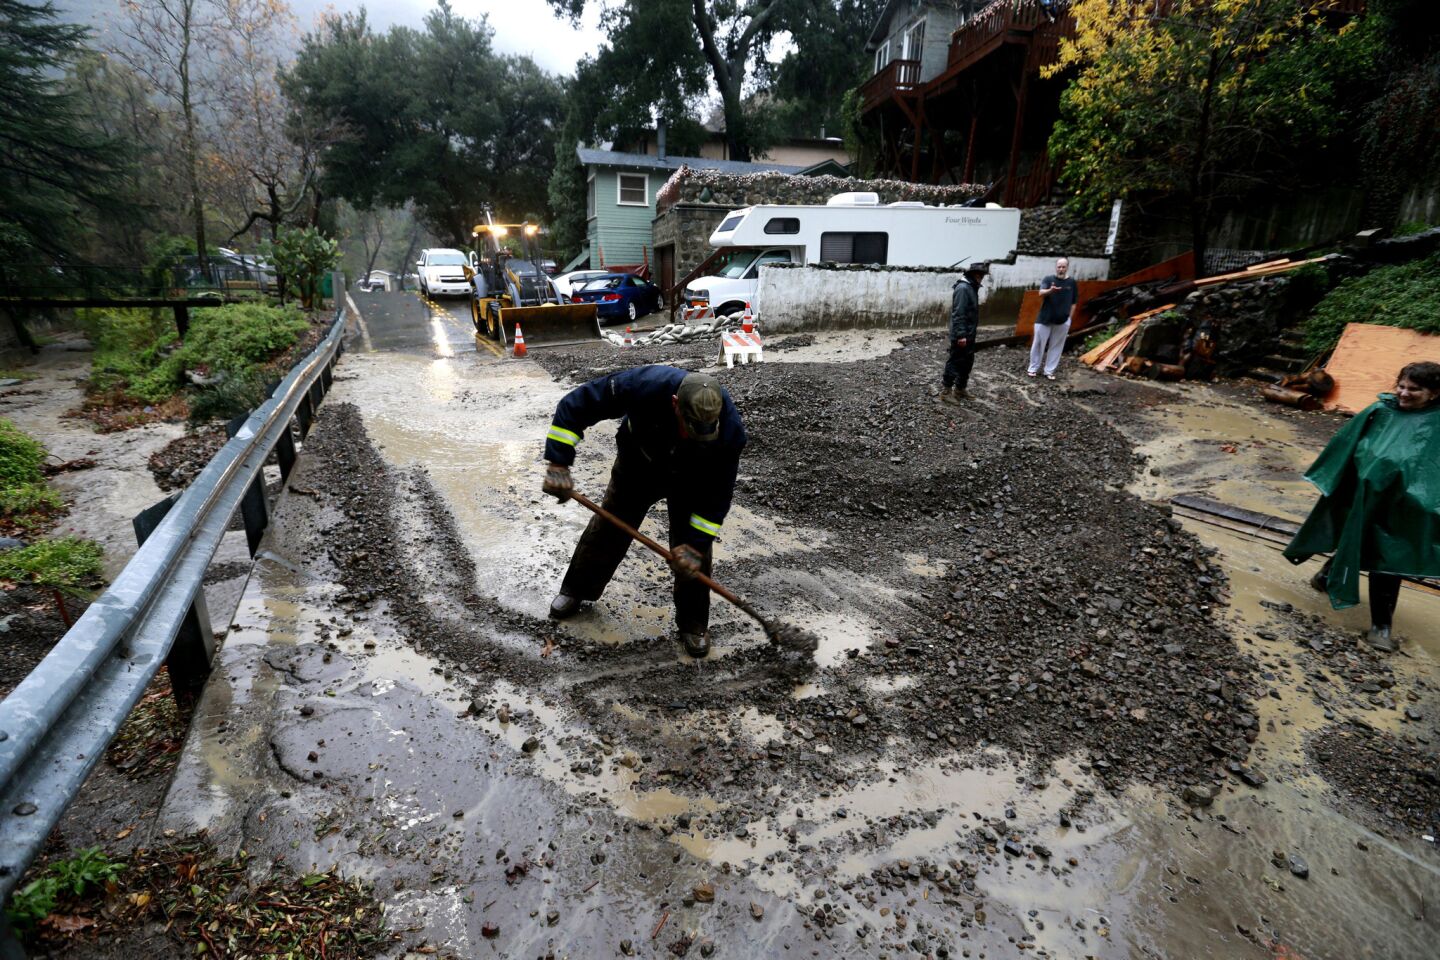 Crews remove mud flows across a road during a flash flood watch in the Silverado Canyon burn area.